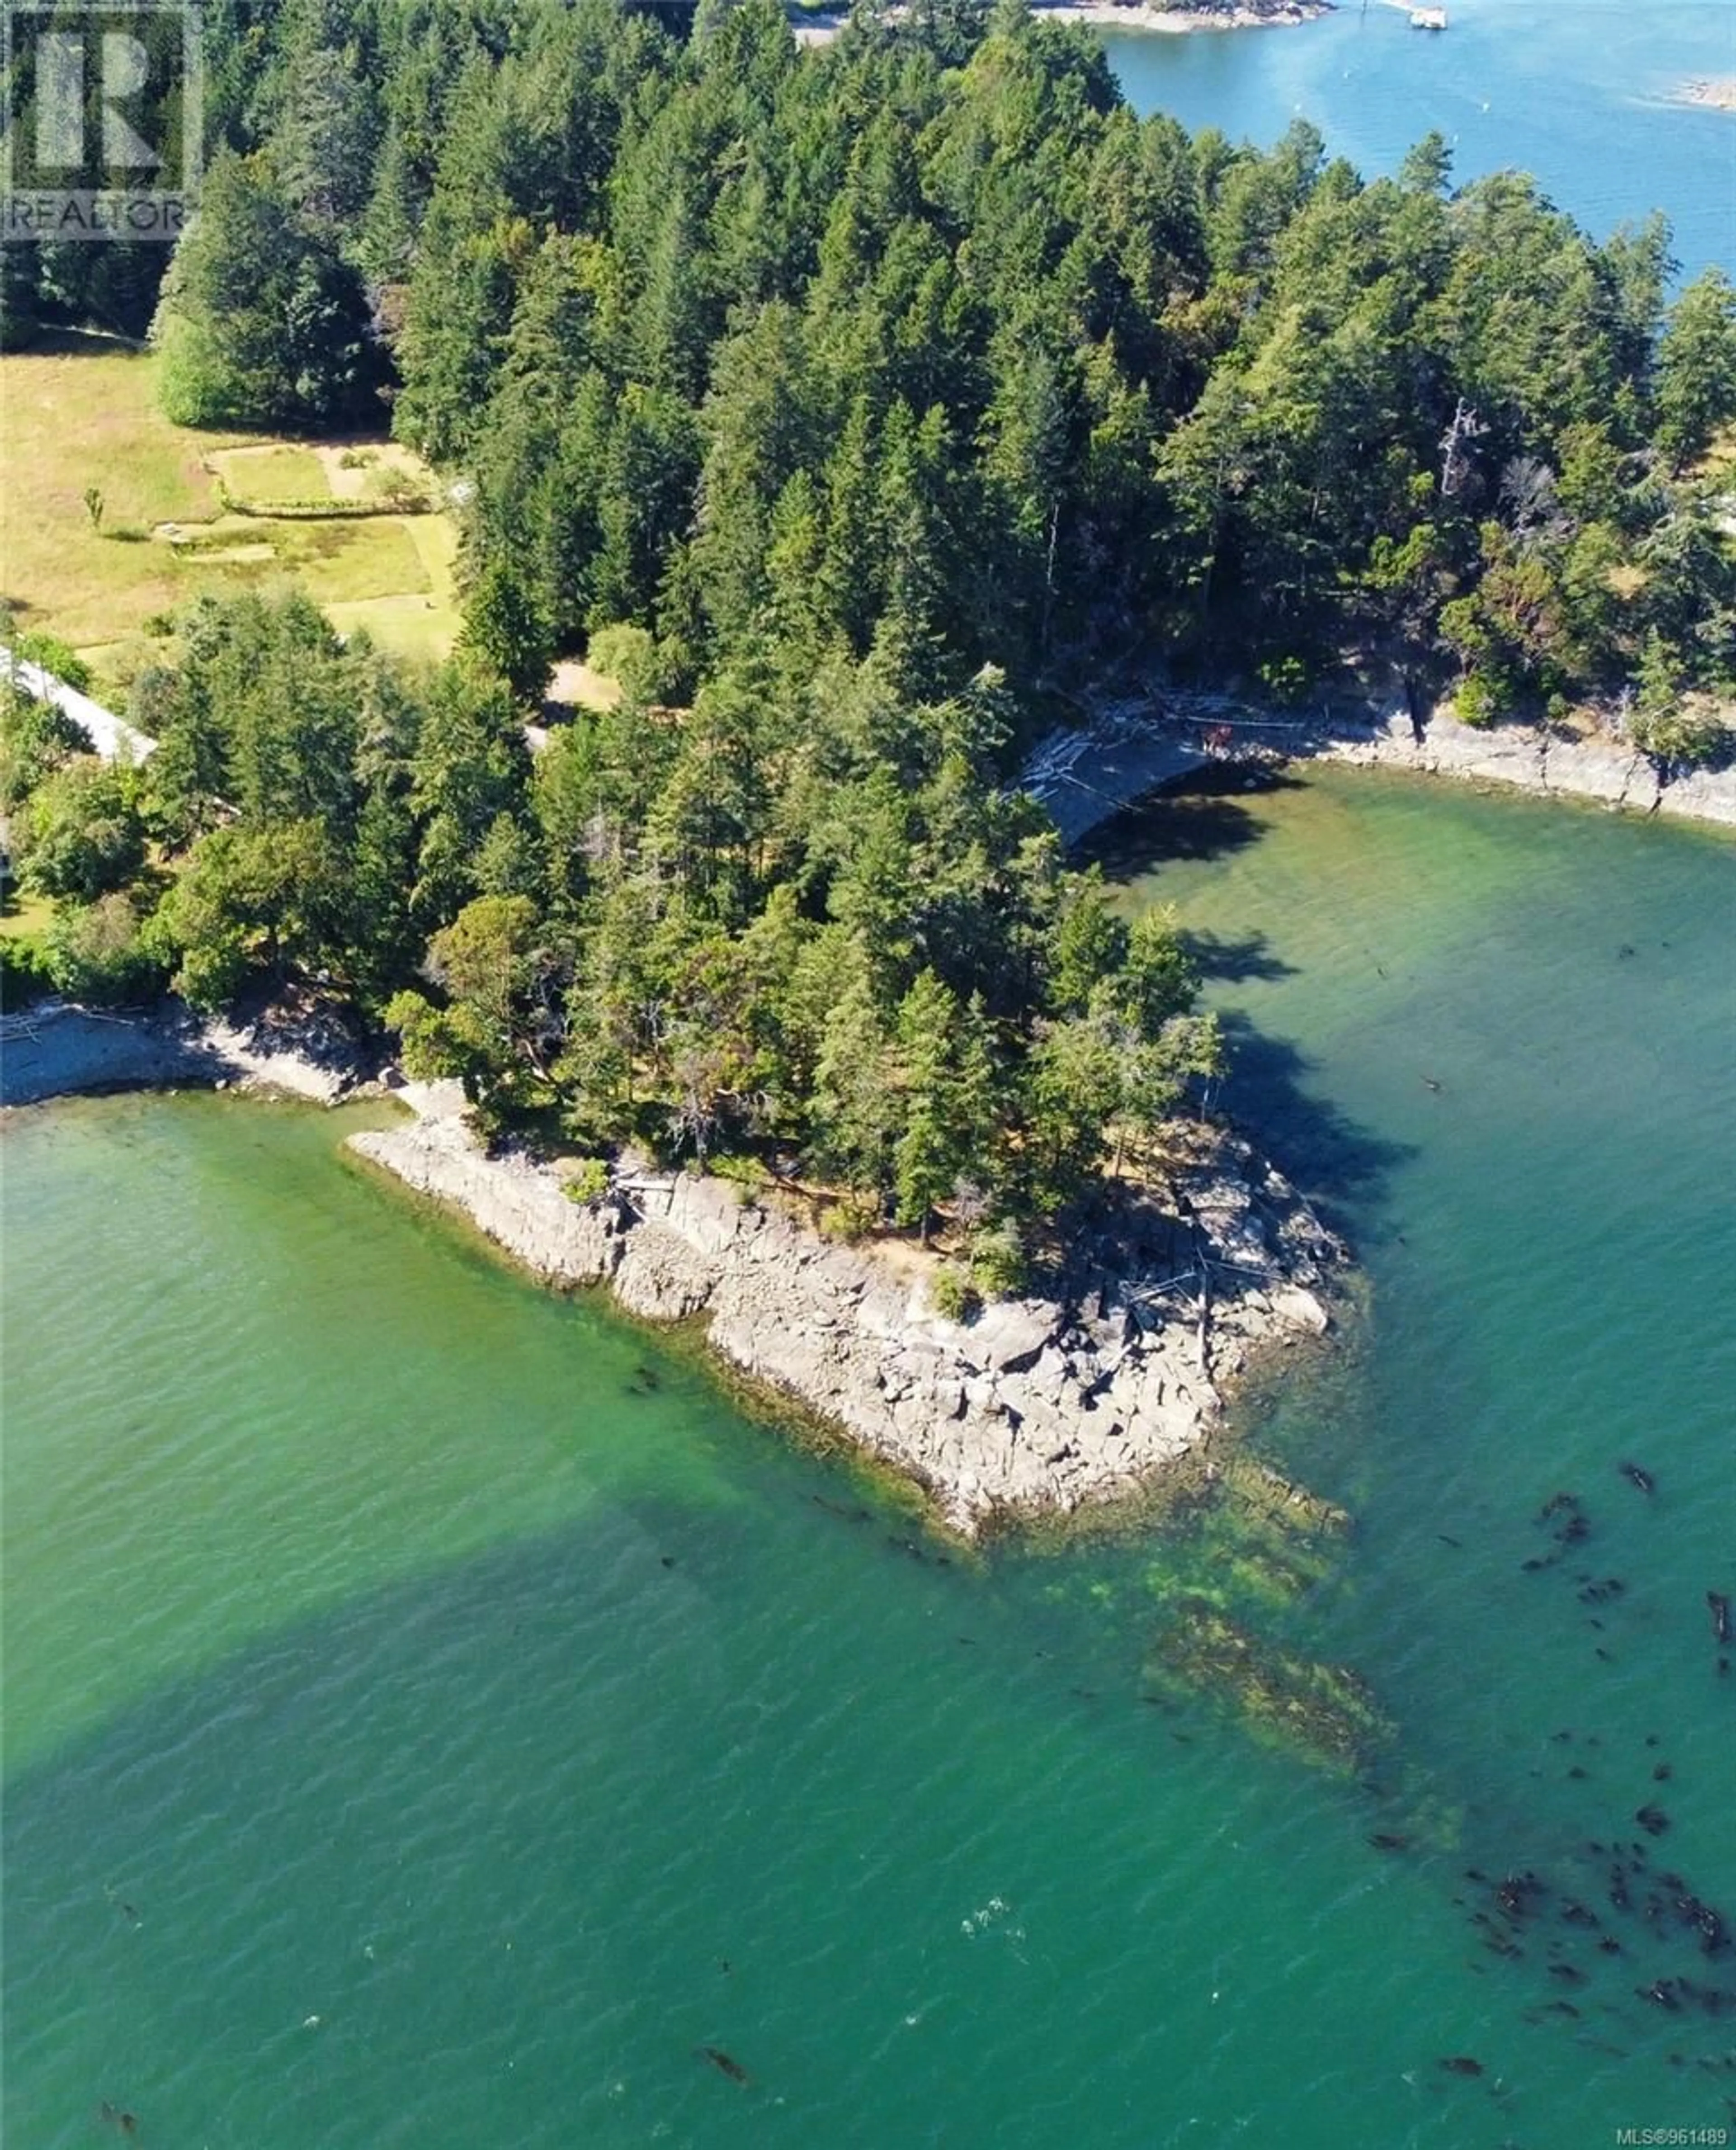 Lakeview for 4312 Clam Bay Rd, Pender Island British Columbia V0N2M1